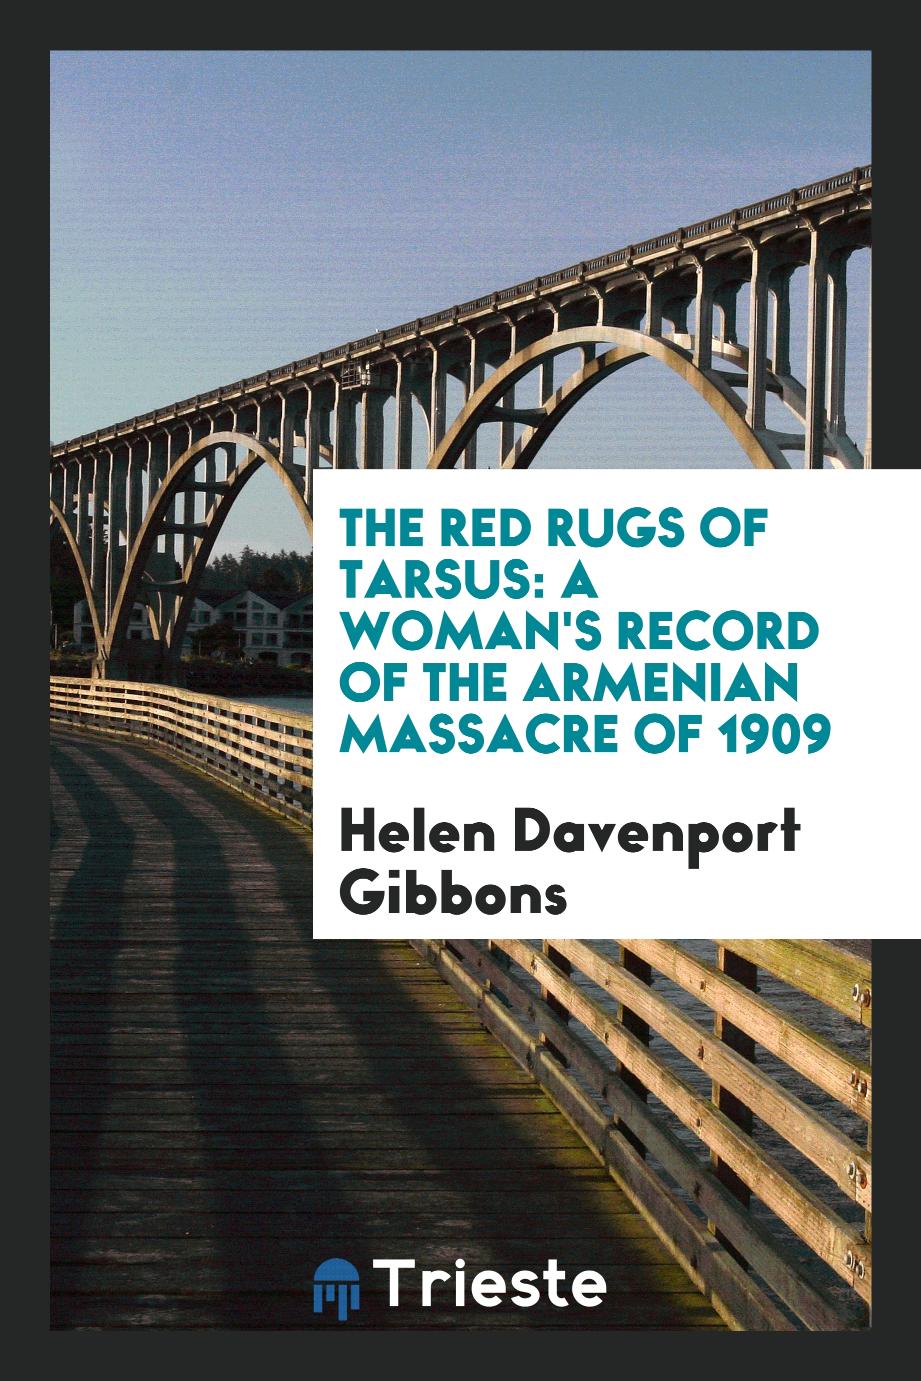 The red rugs of Tarsus: a woman's record of the Armenian massacre of 1909